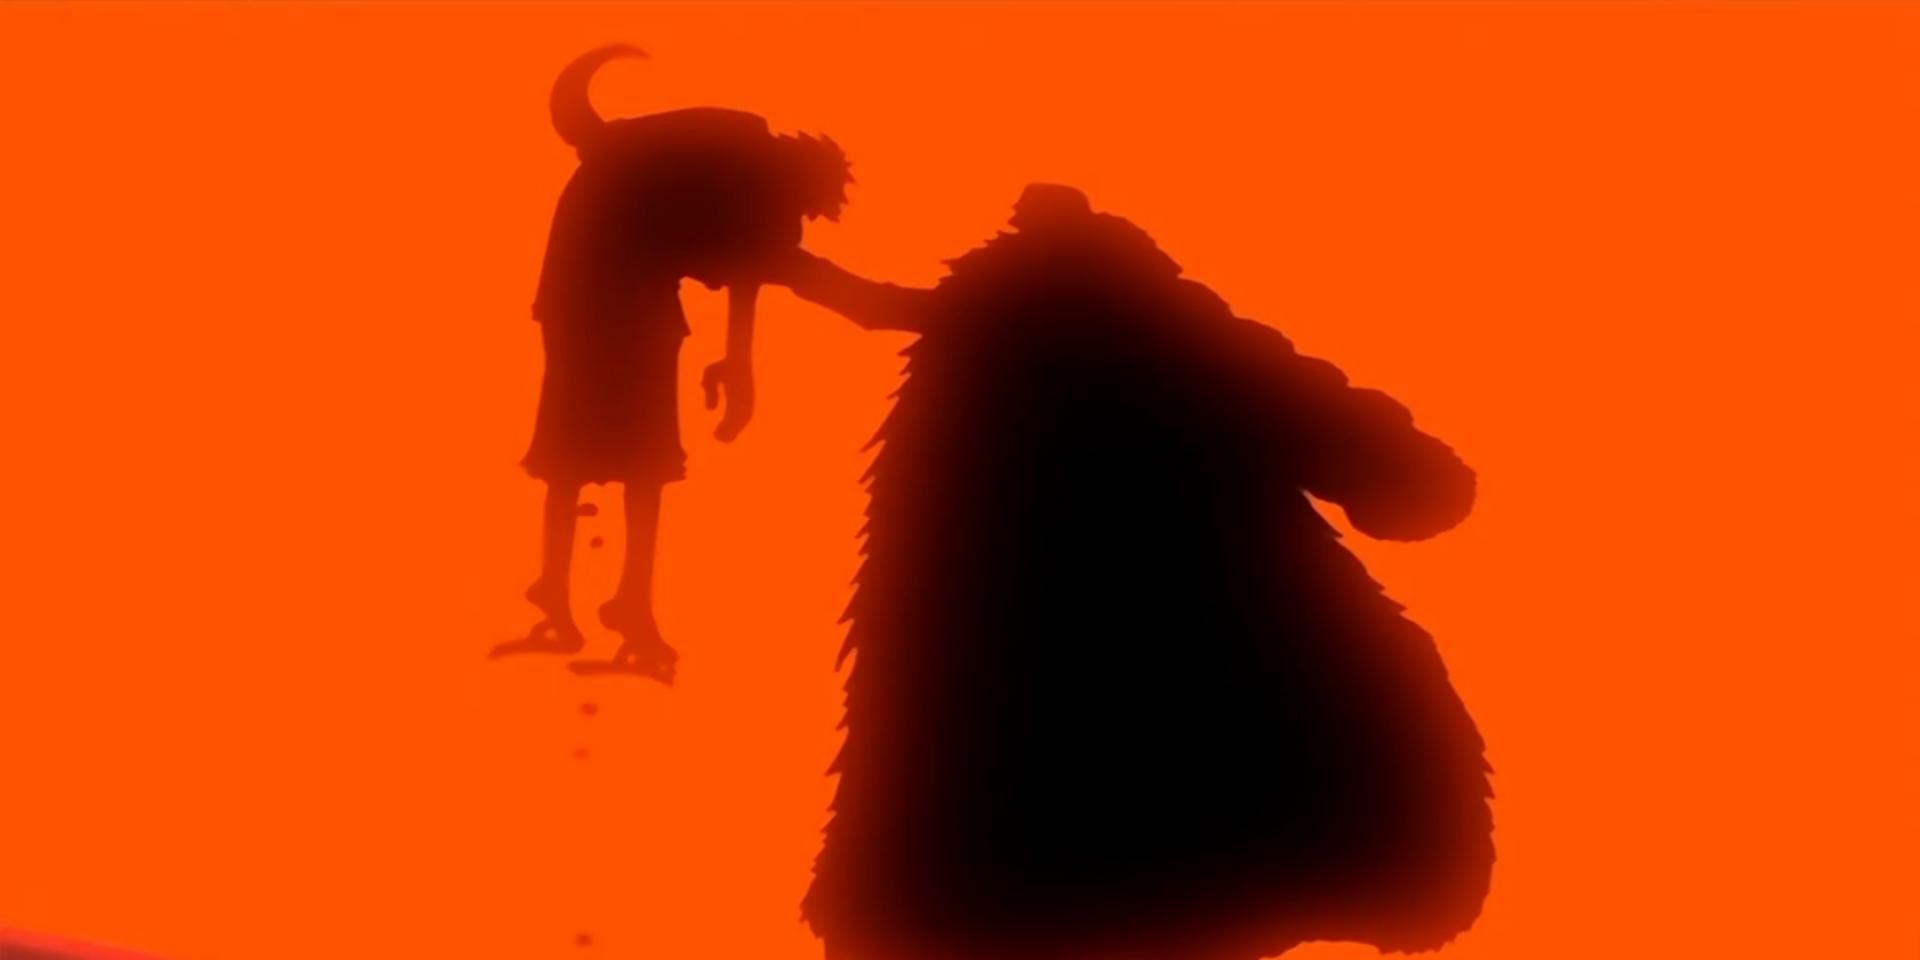 Sir Crocodile punches a hole through Luffy's stomach with his hook hand on an orange sky in One Piece